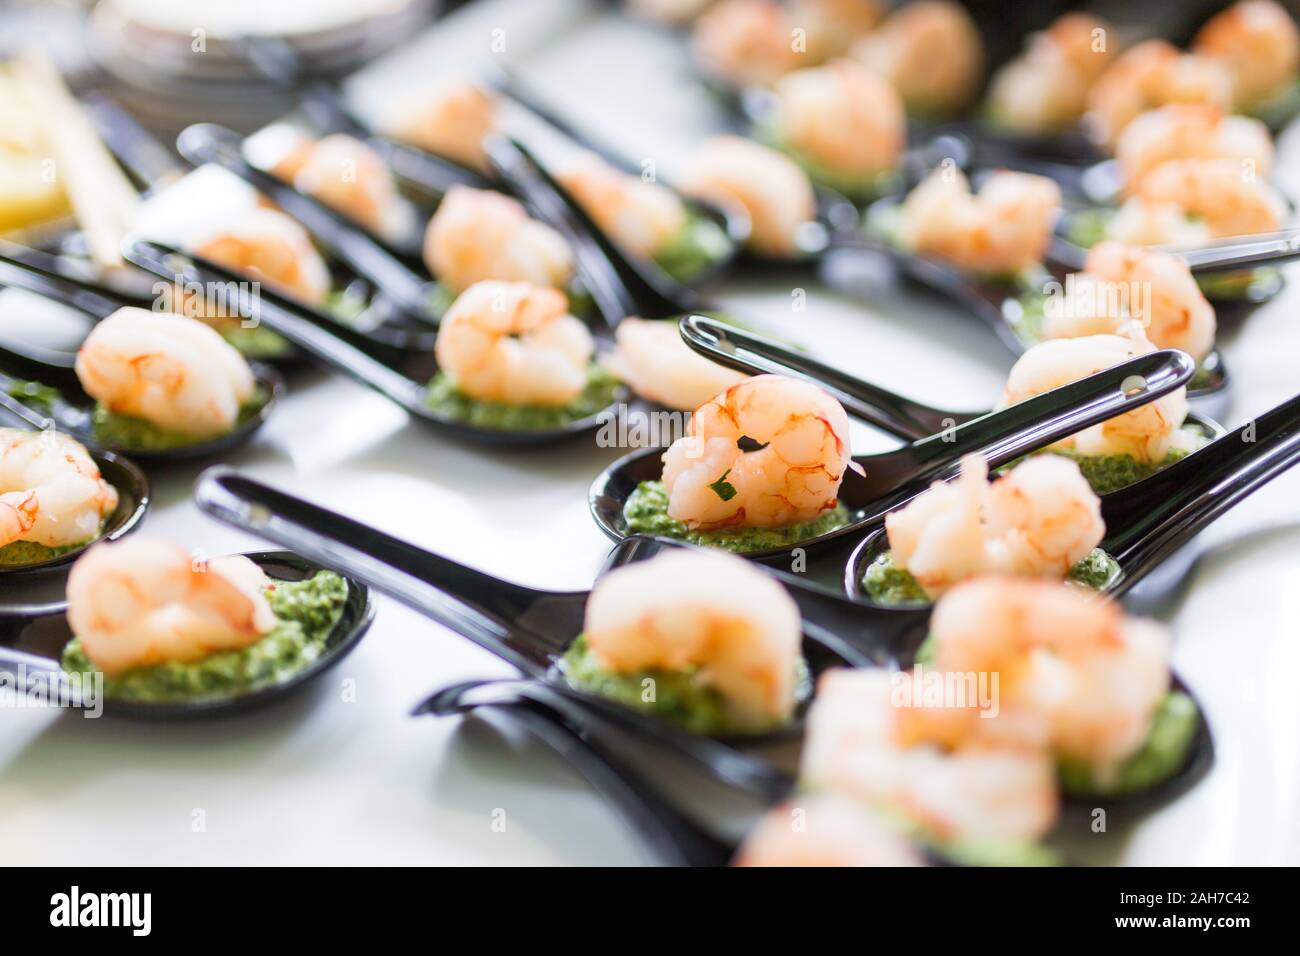 Close up of a tray holding a number of black chinese spoons each with a shrimp and some green dressing Stock Photo